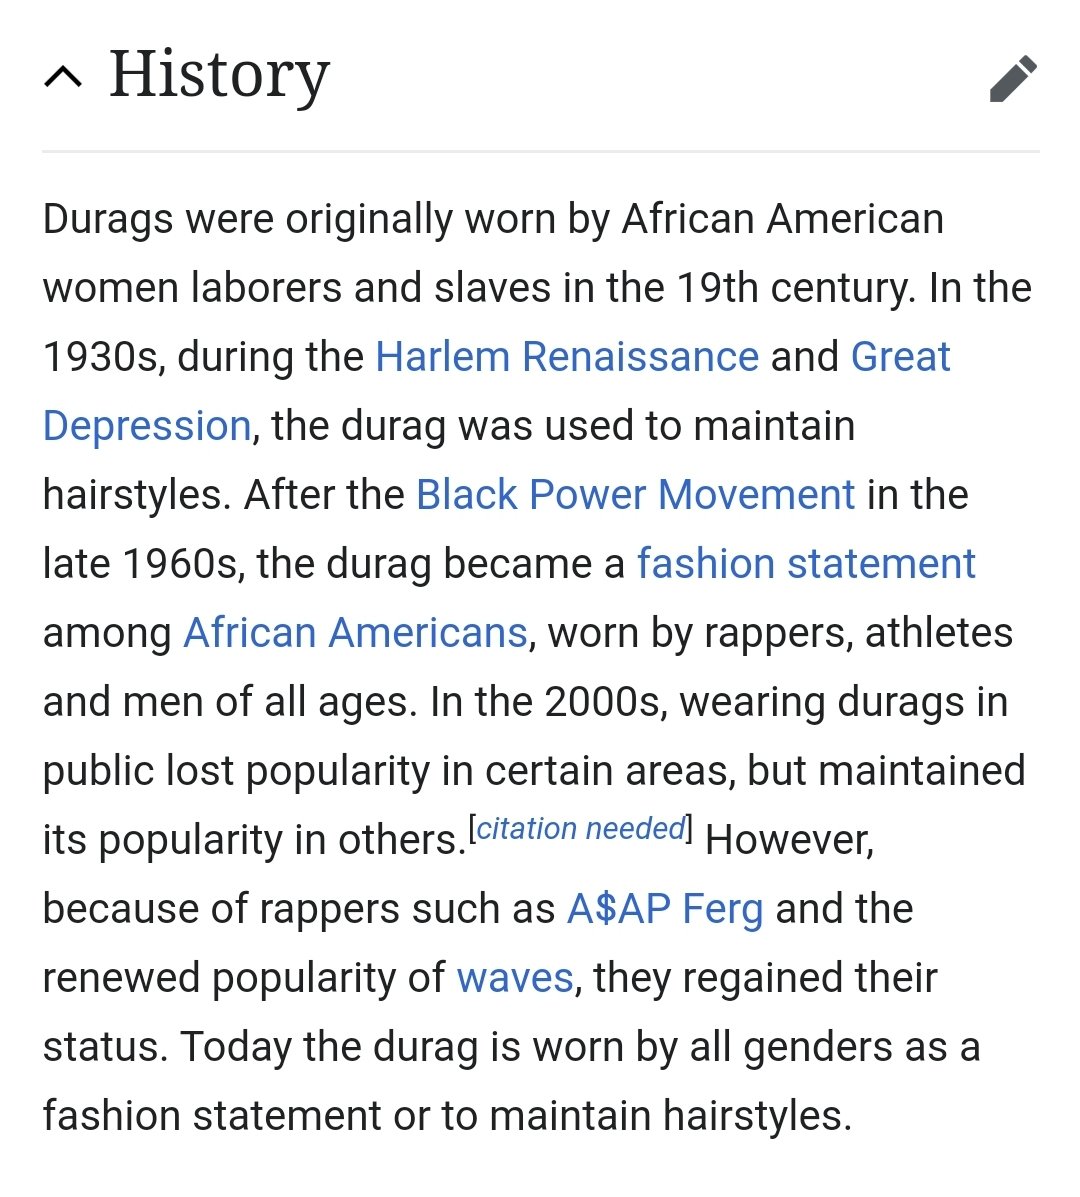 Black rappers and hiphop dancers nowadays use durag as fashion statement. So it's still not okay to follow black community who now use durag as a fashion statement? If you're black, kindly answer me please I wanna know your opinion on this.